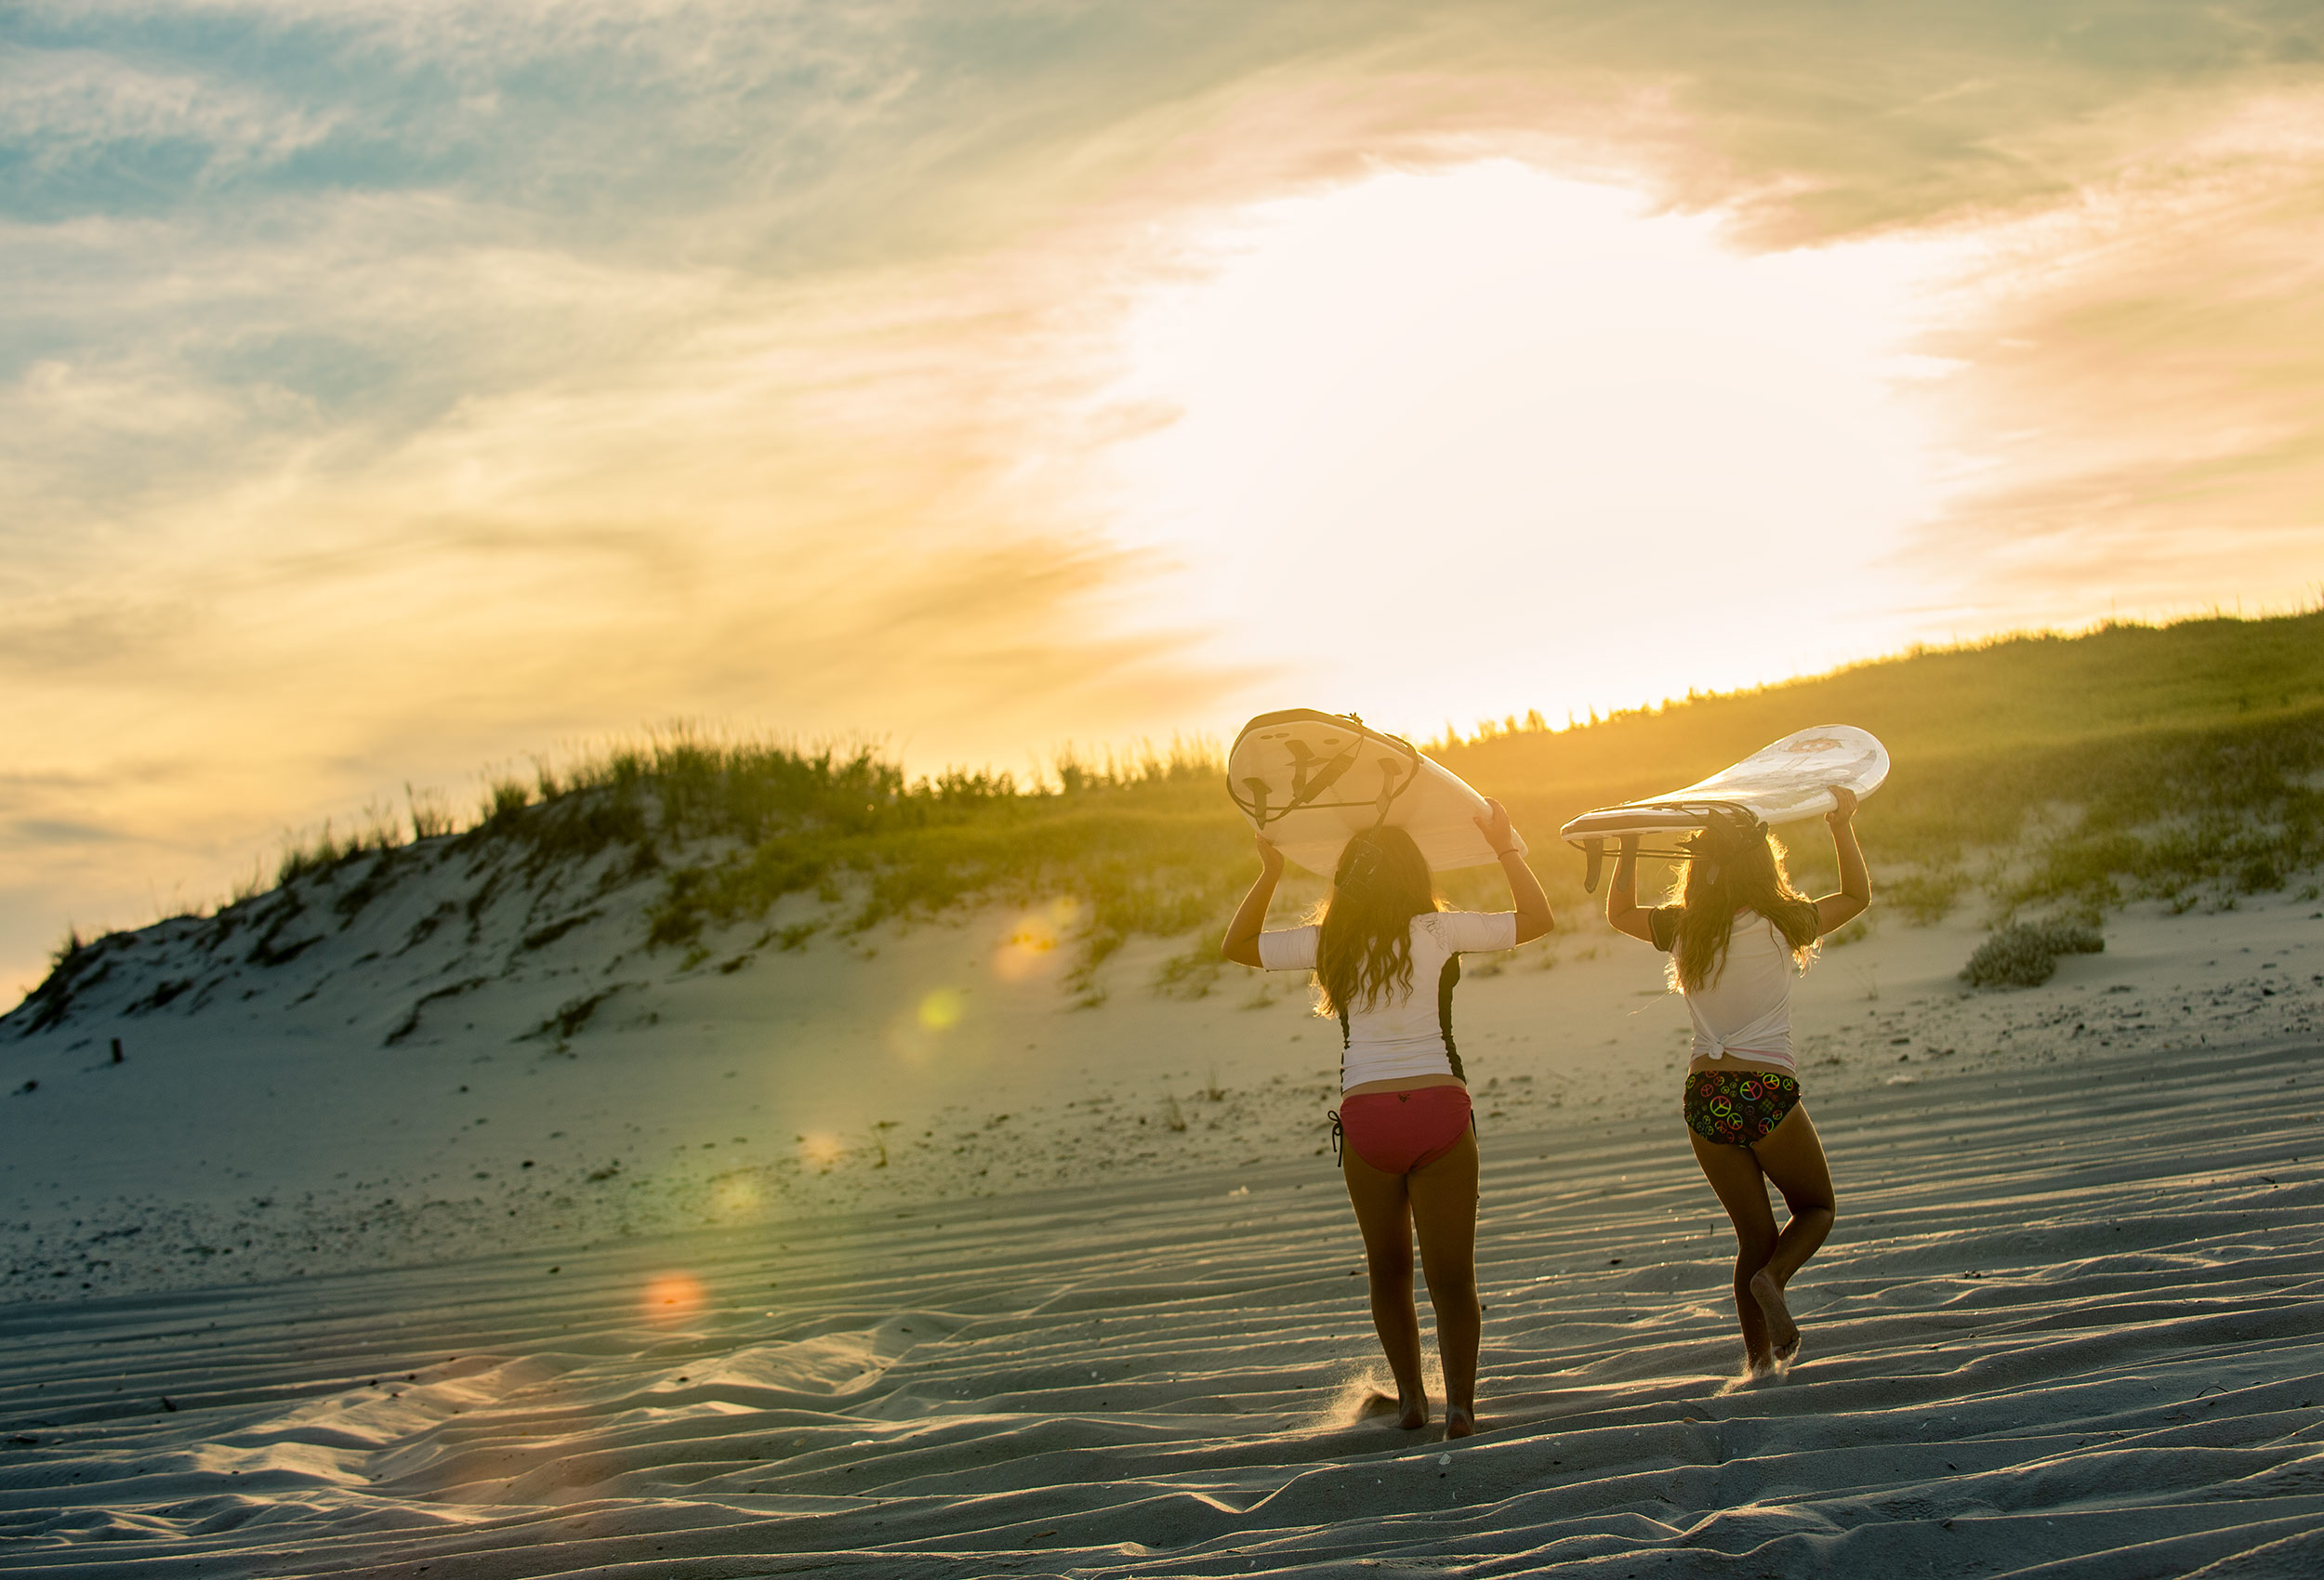 Surfer girls walk towards dunes with surfboards on beach at sunset